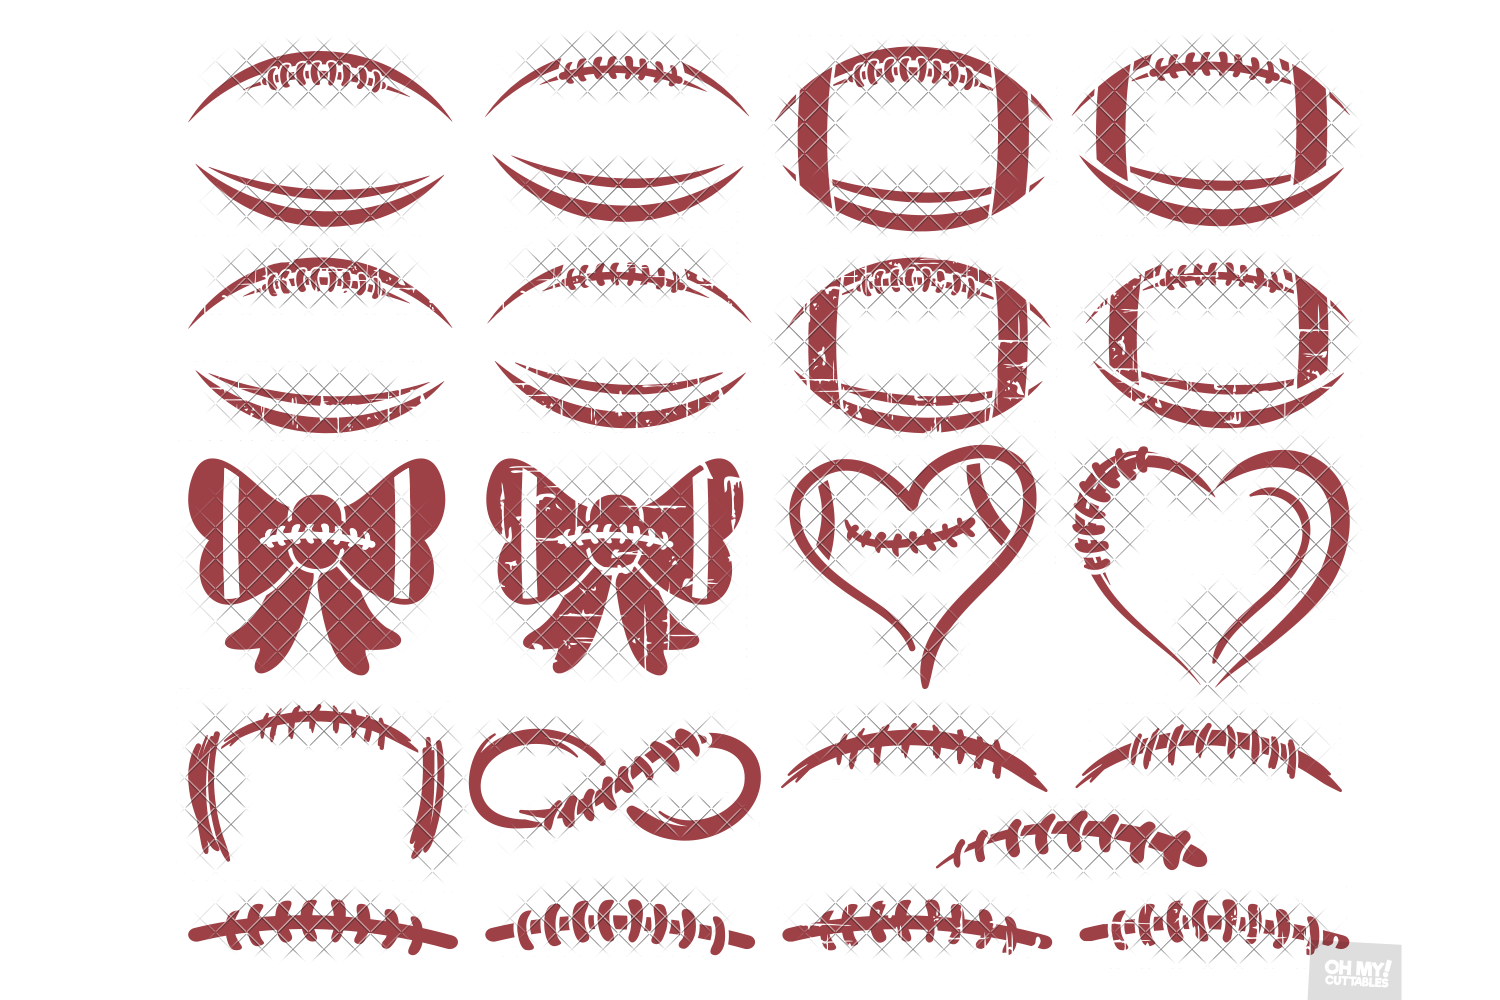 Download Football Laces SVG in SVG, DXF, PNG, EPS, JPG